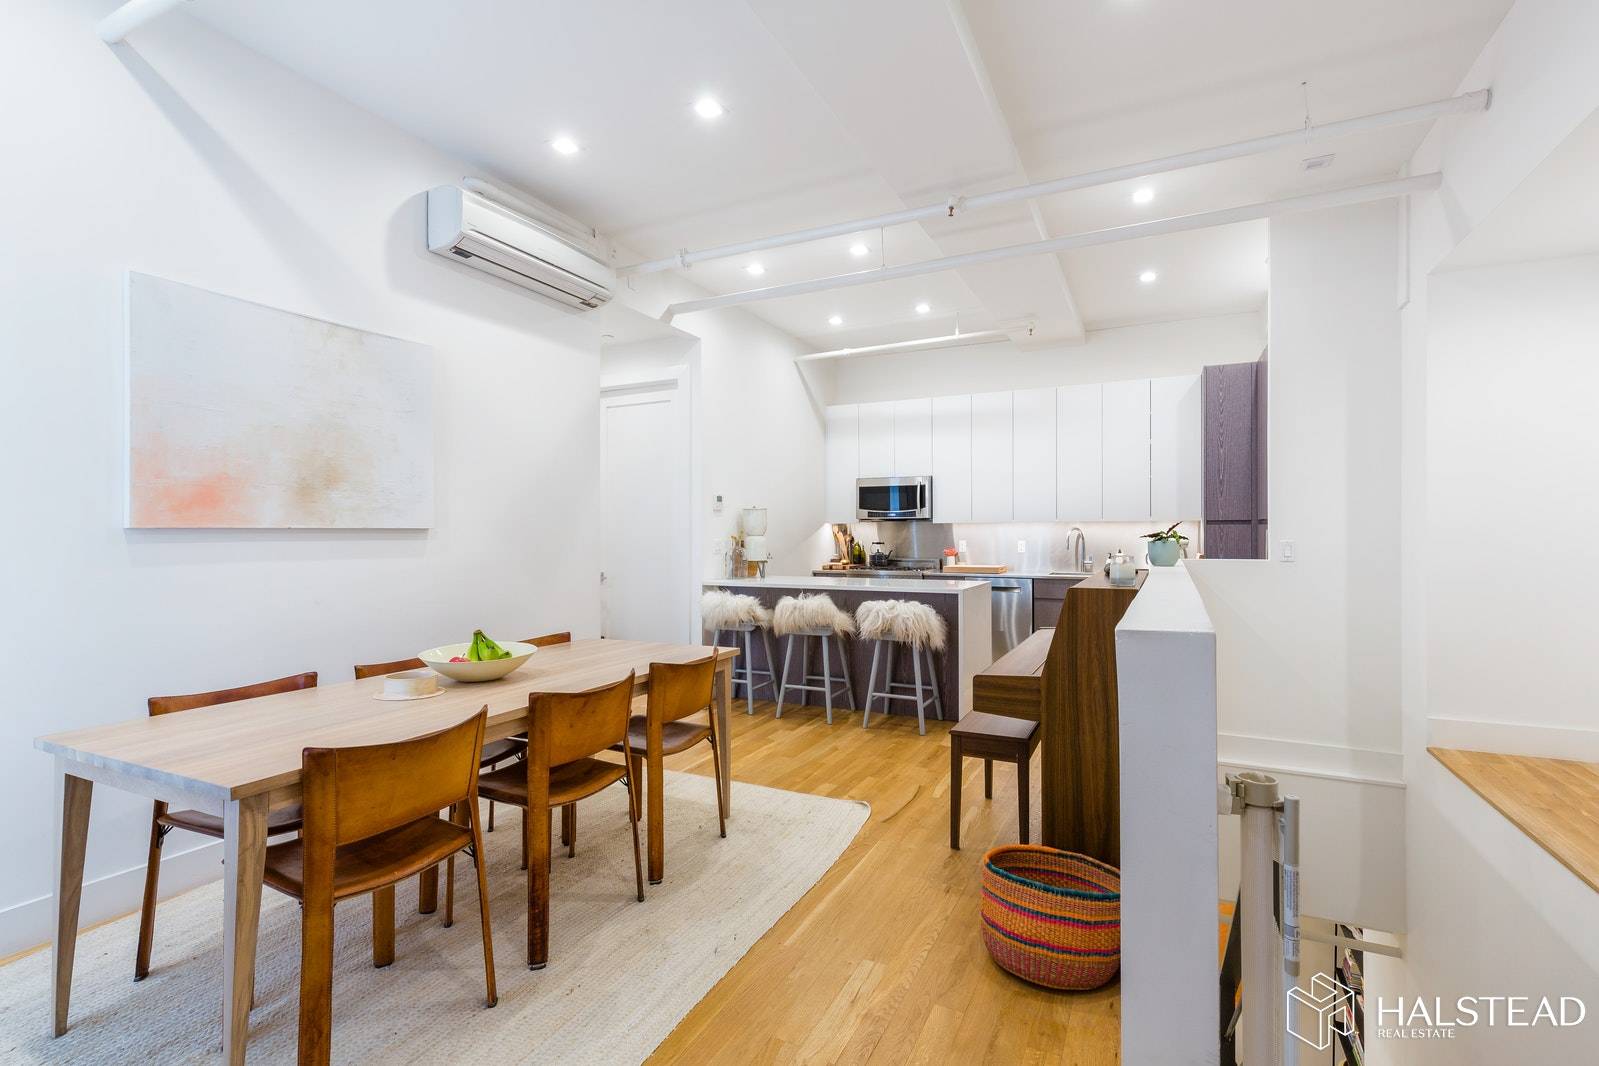 Ideally located on the border of Greenwood Heights and Park Slope, this chic and spacious 1467 square foot duplex condominium has its own separate entrance and functions well as a ...